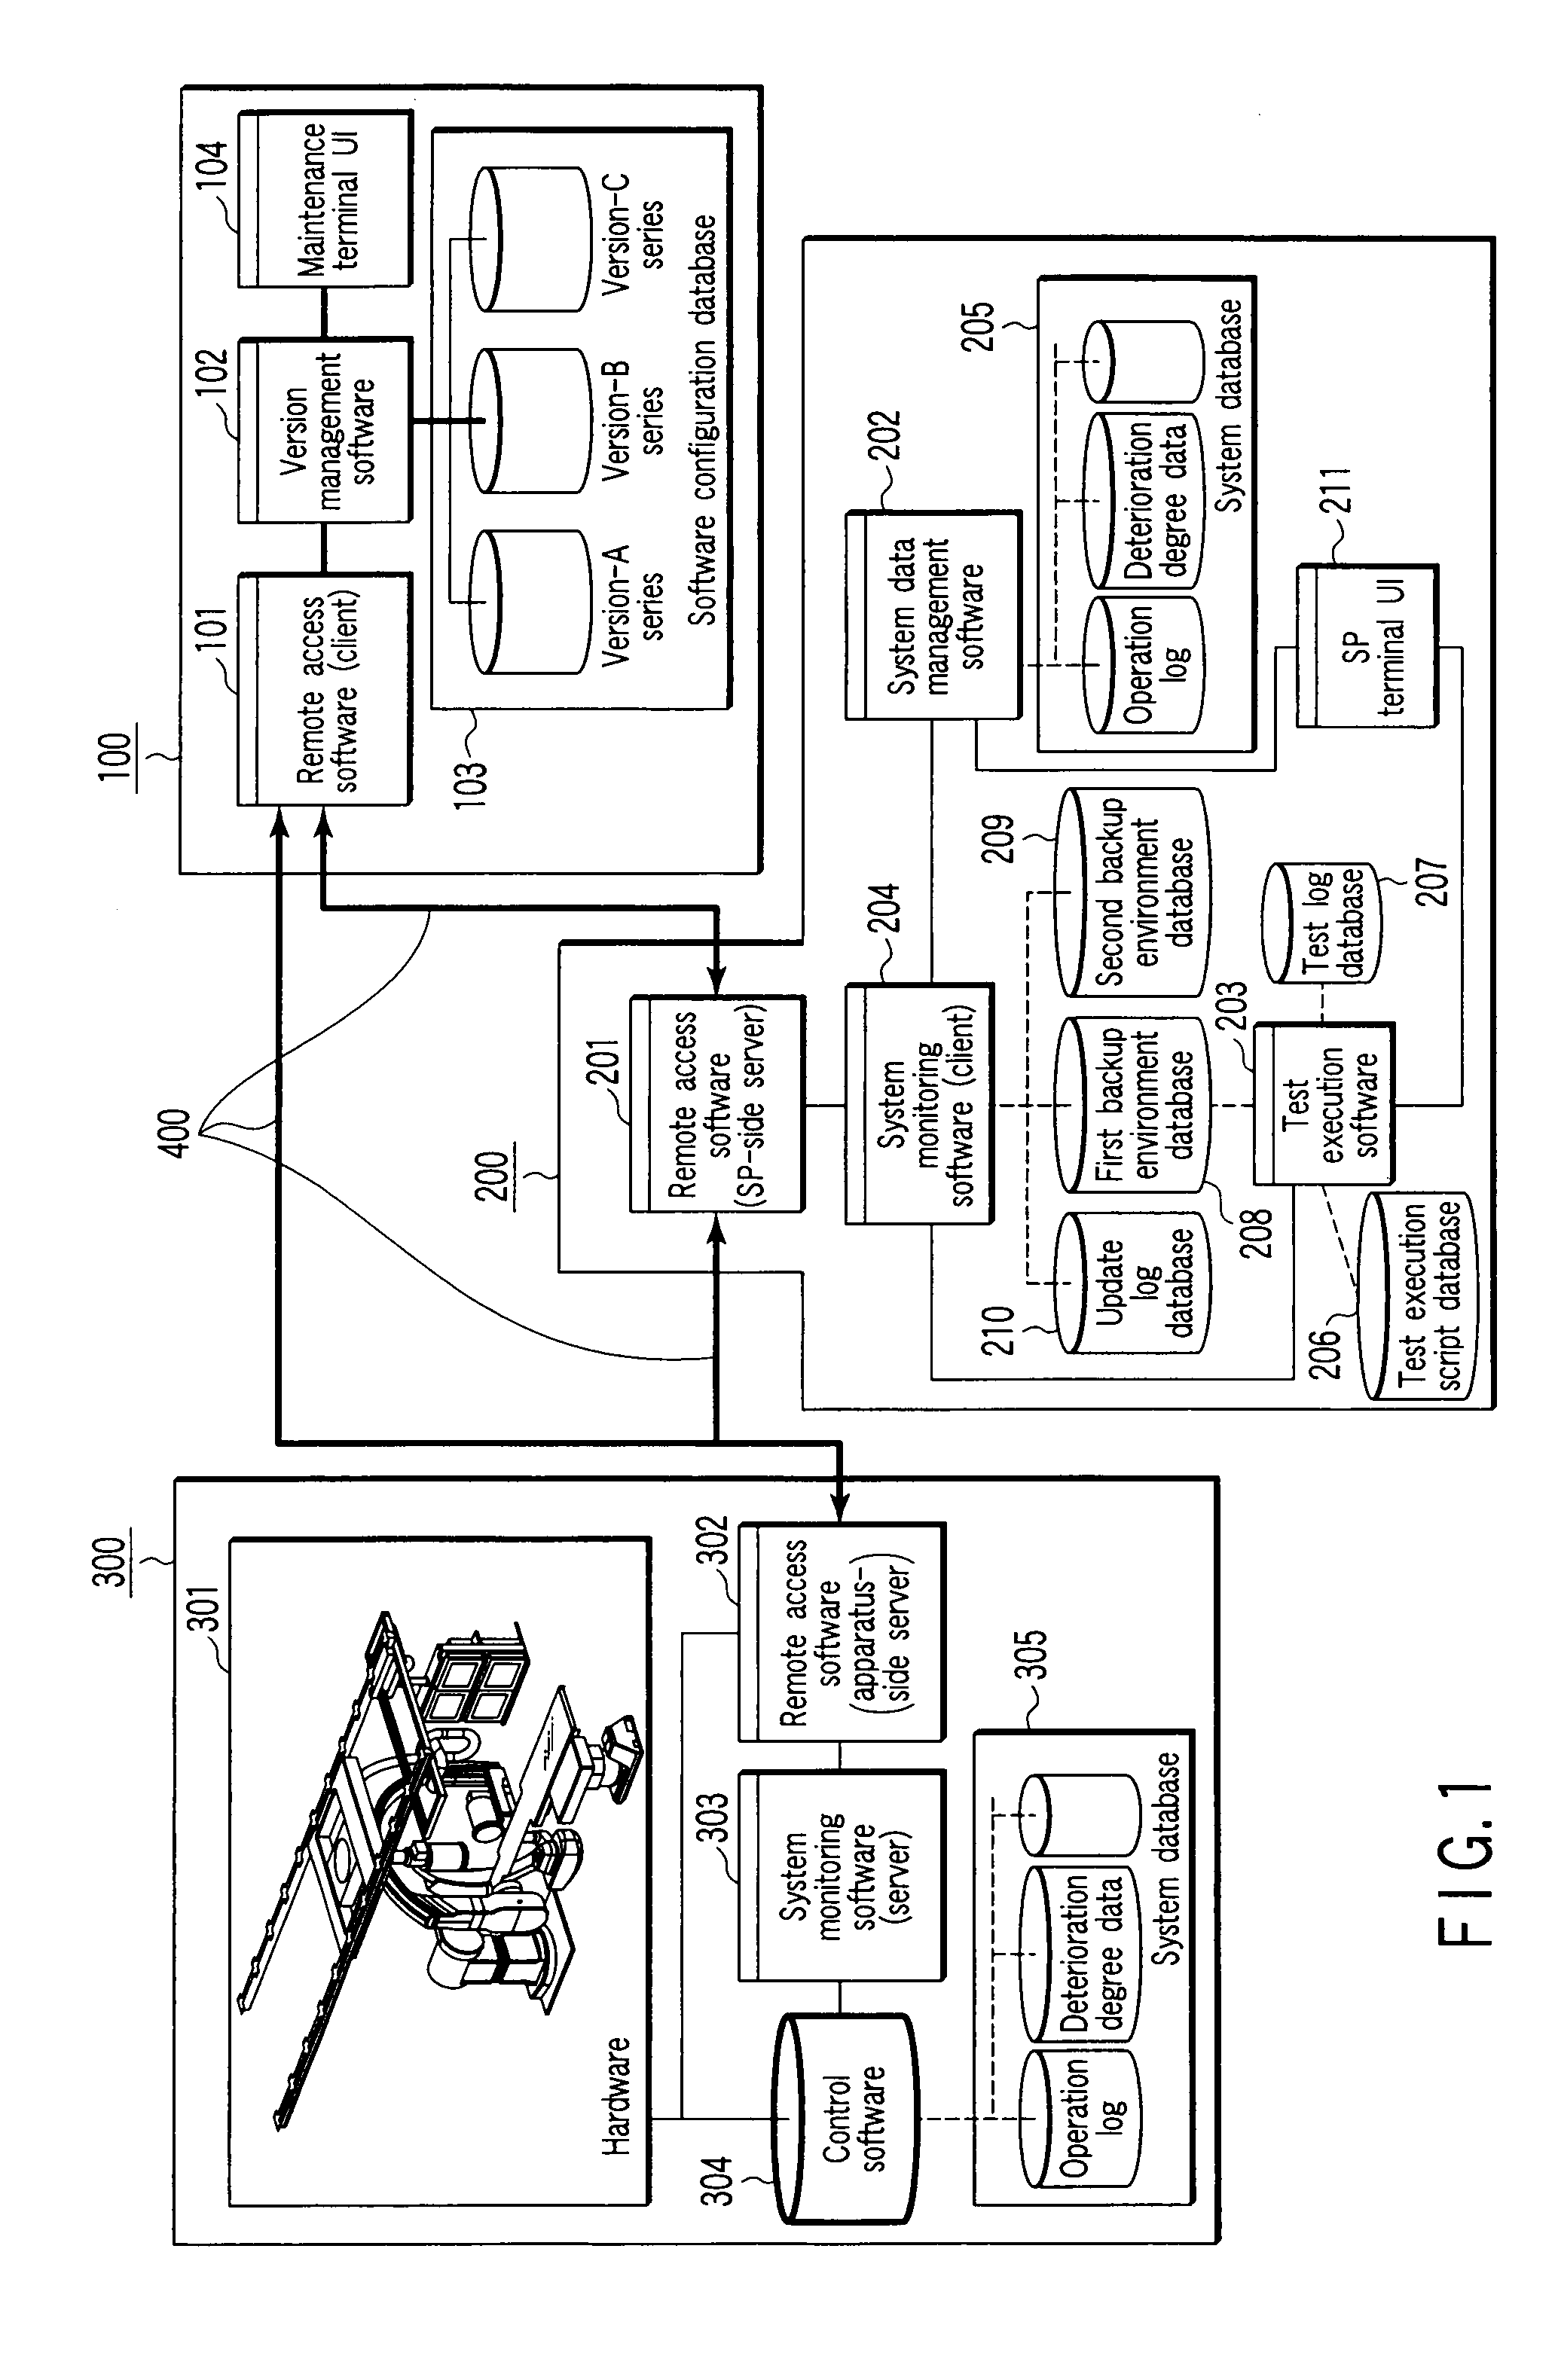 Software updating apparatus and software updating system